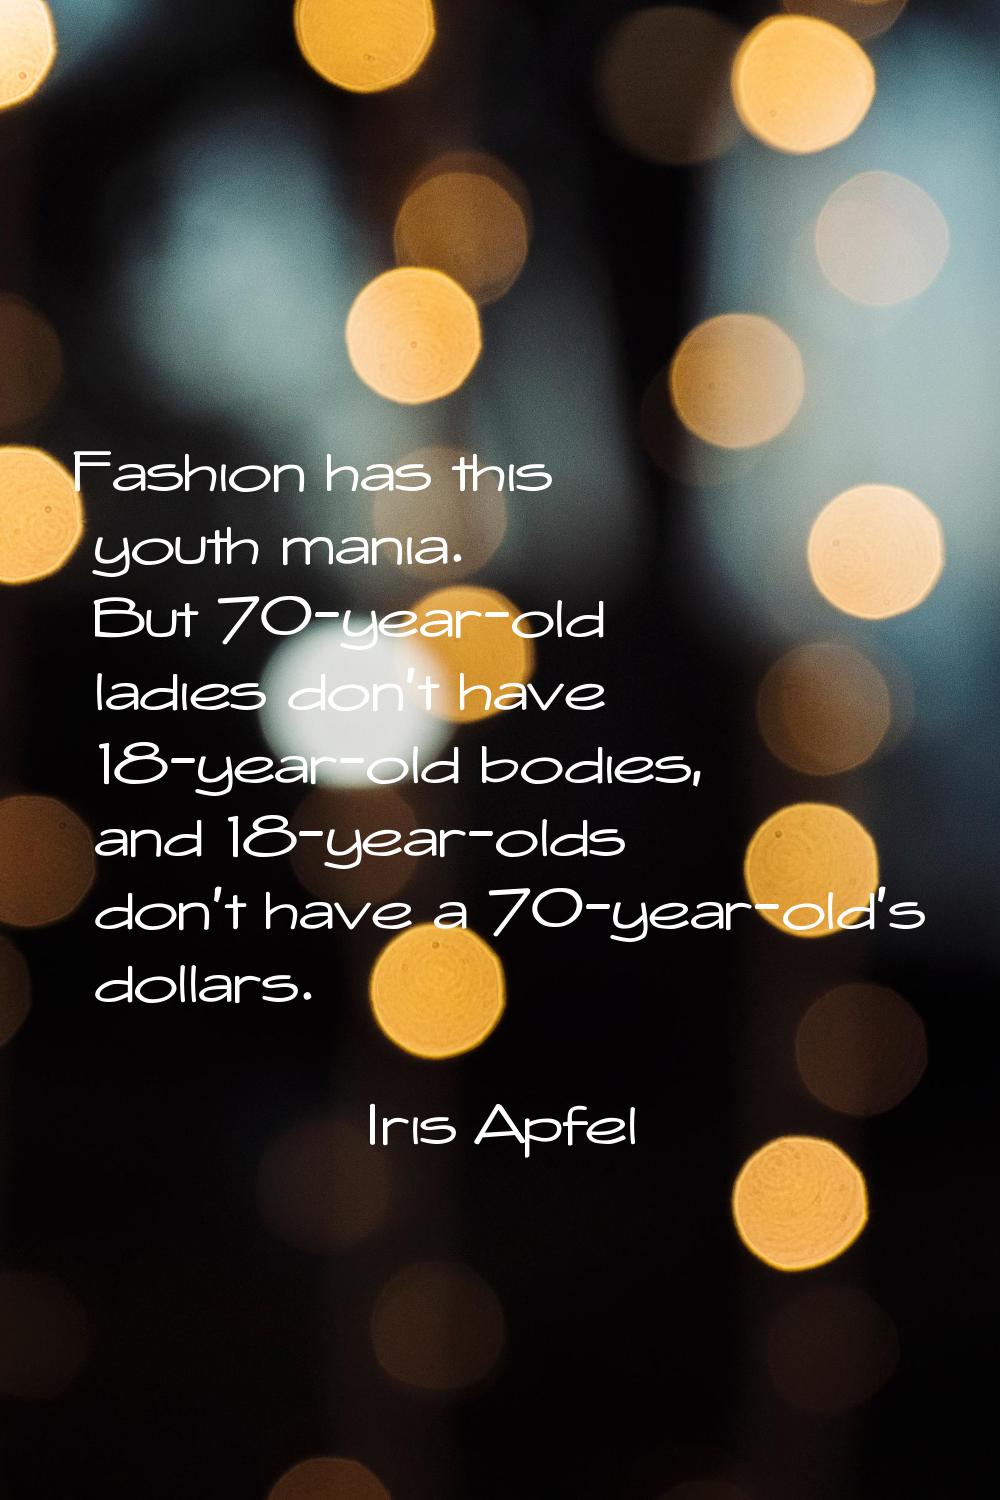 Fashion has this youth mania. But 70-year-old ladies don't have 18-year-old bodies, and 18-year-old